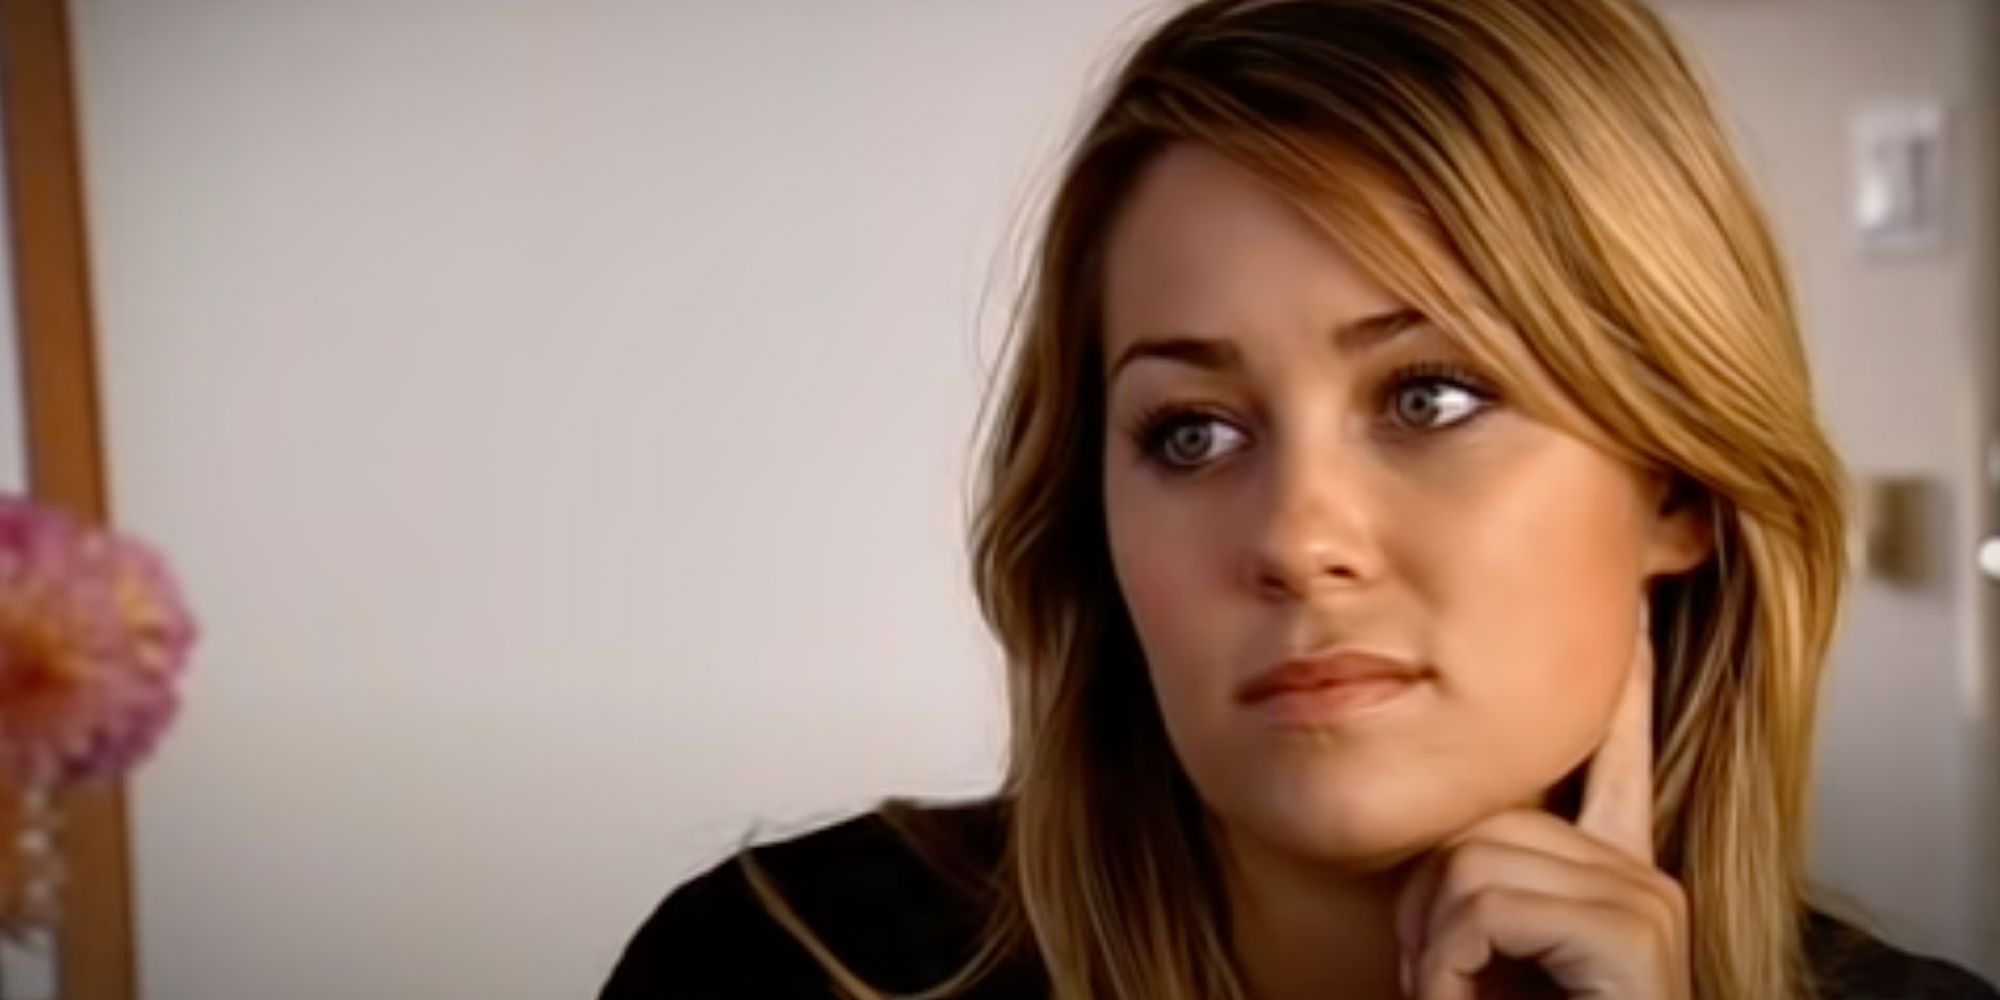 Lauren Conrad Remembers the Infamous Confrontations, The Hills